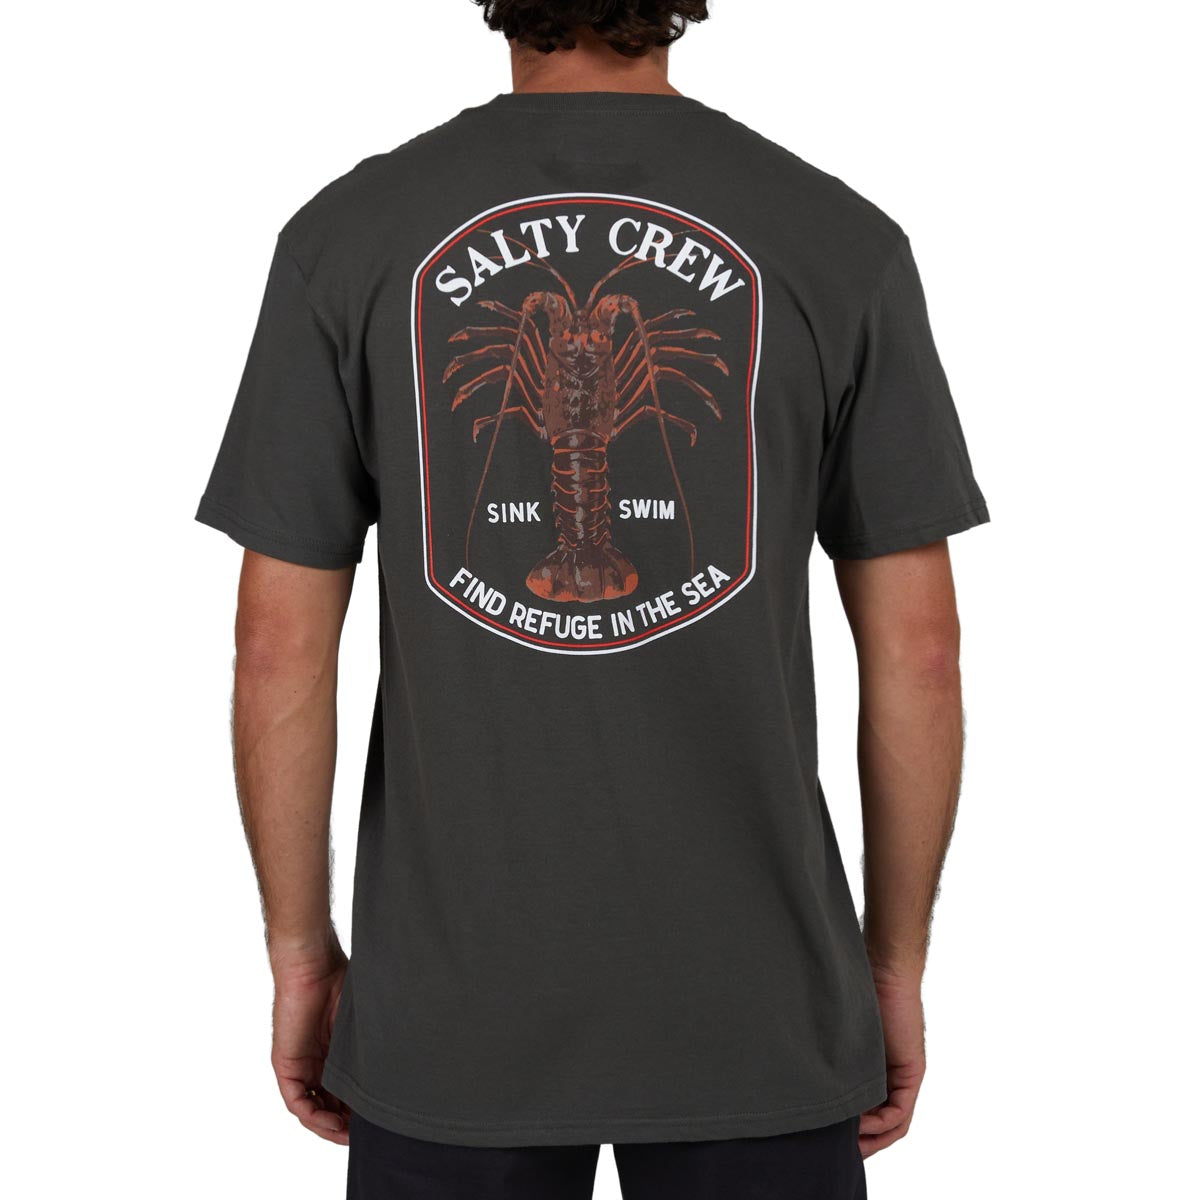 Salty Crew Spiny Classic T-Shirt - Charcoal image 2